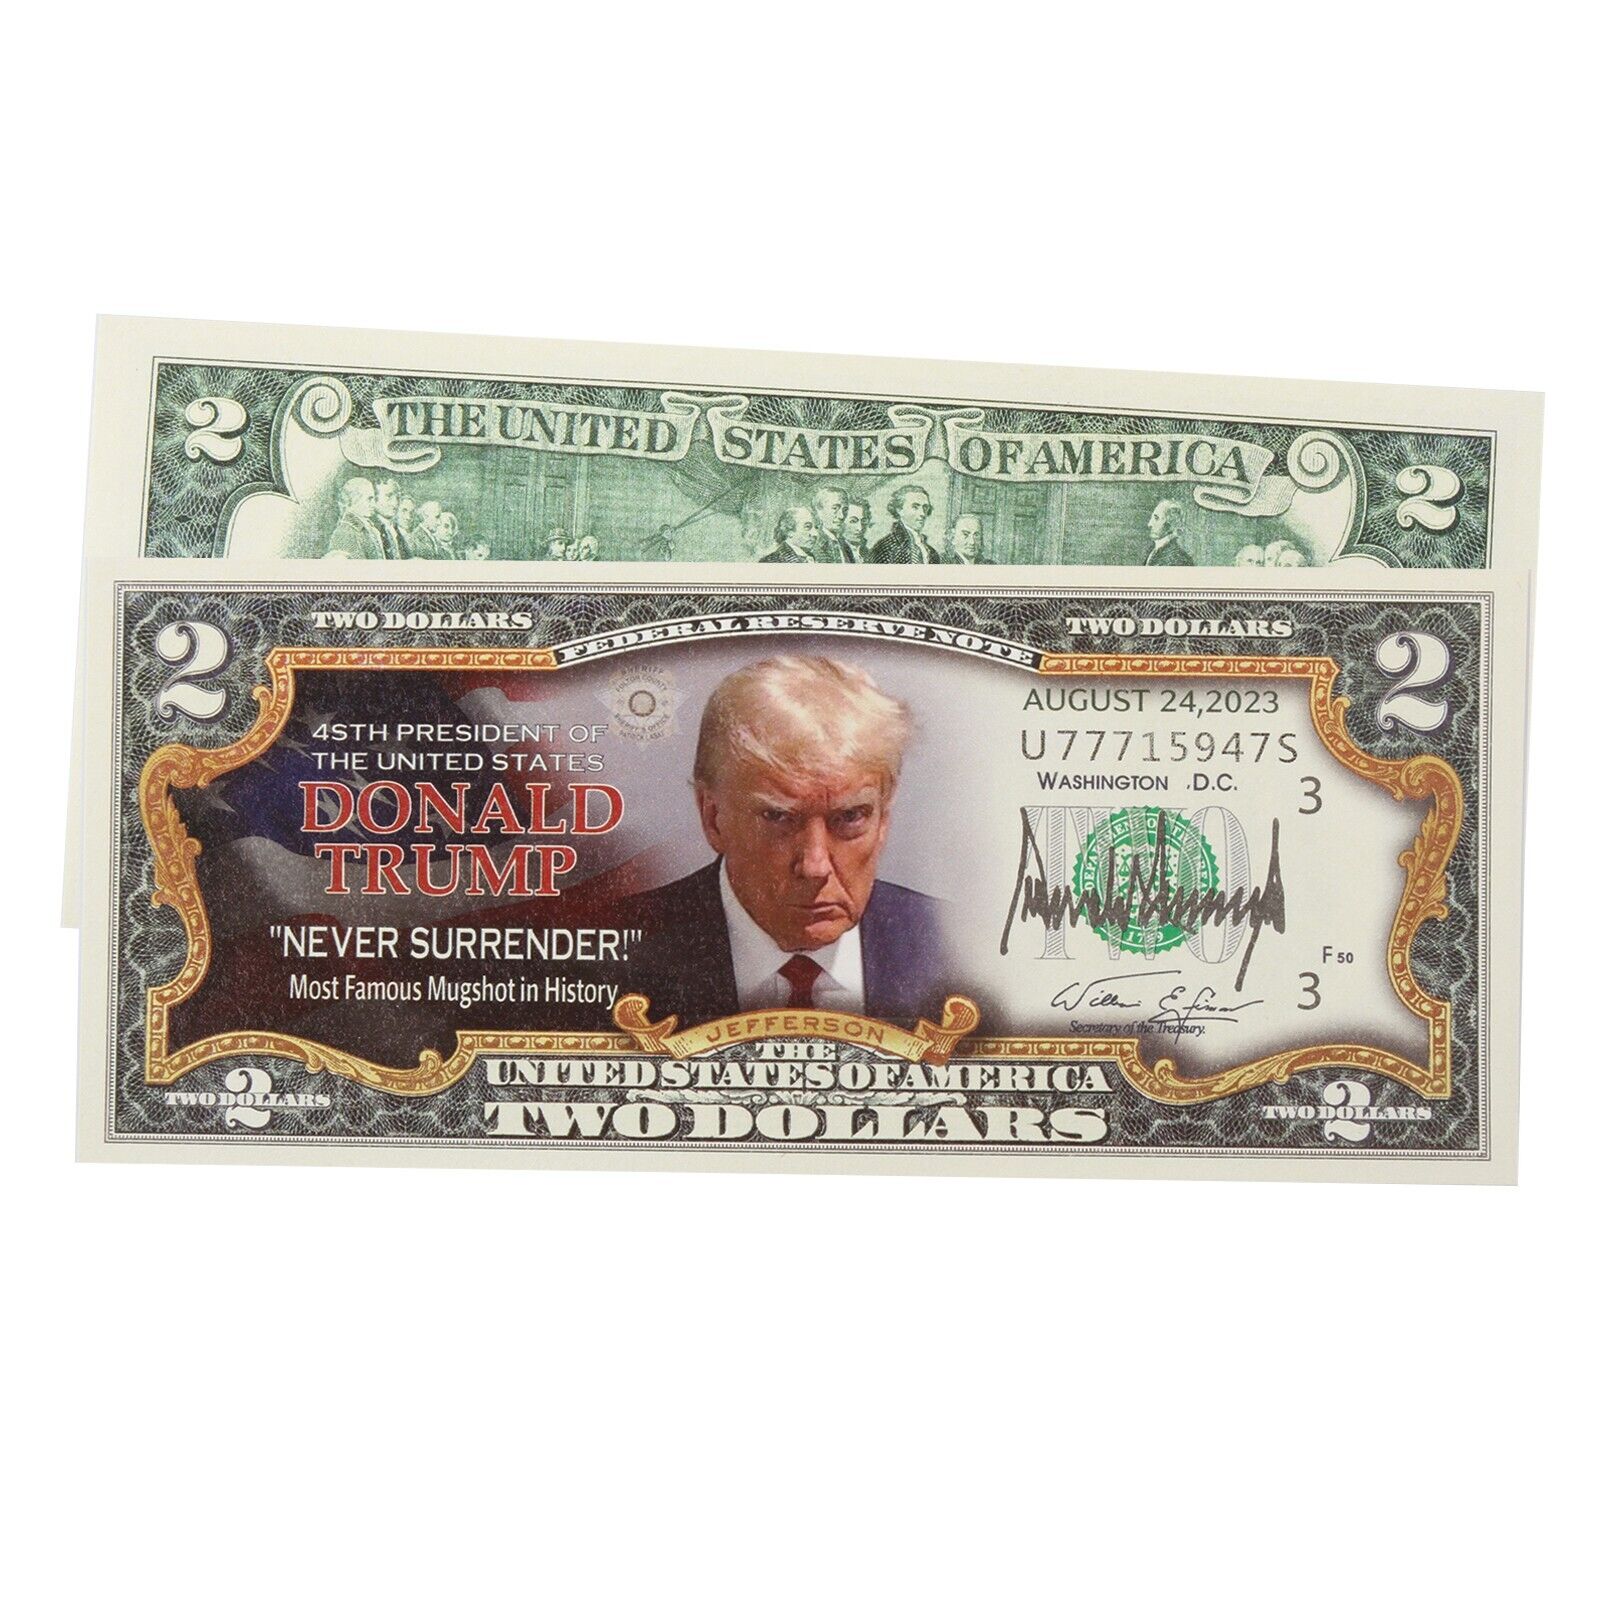 Donald Trump Never Surrender Colorized Mugshot 2 Dollar Bill Uncirculated Comme